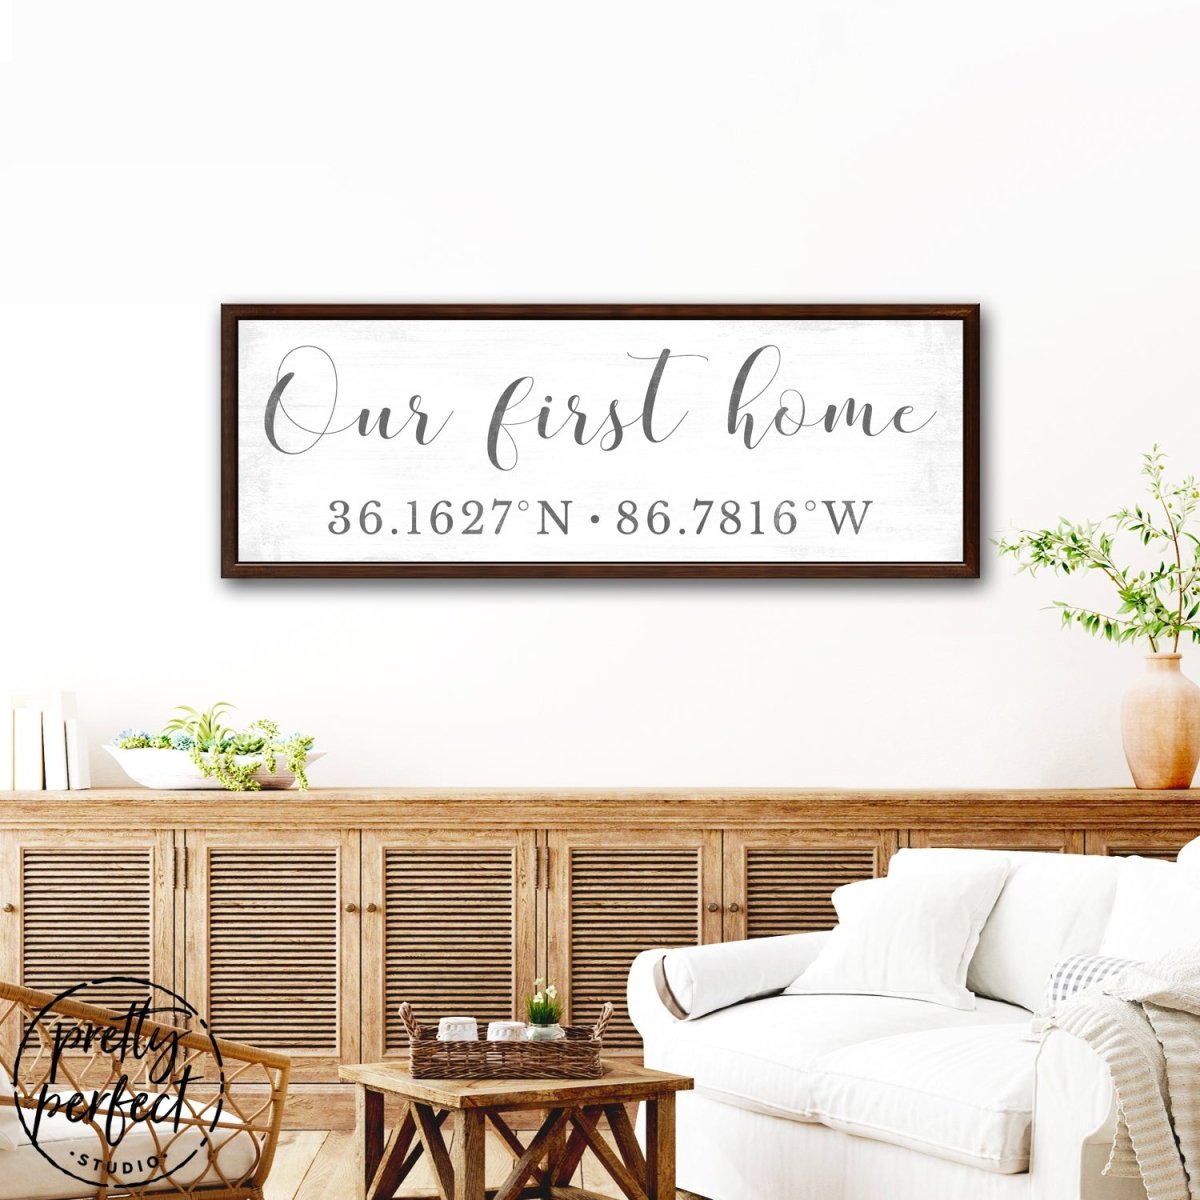 Our First Home Sign With GPS Coordinates in Living Room - Pretty Perfect Studio